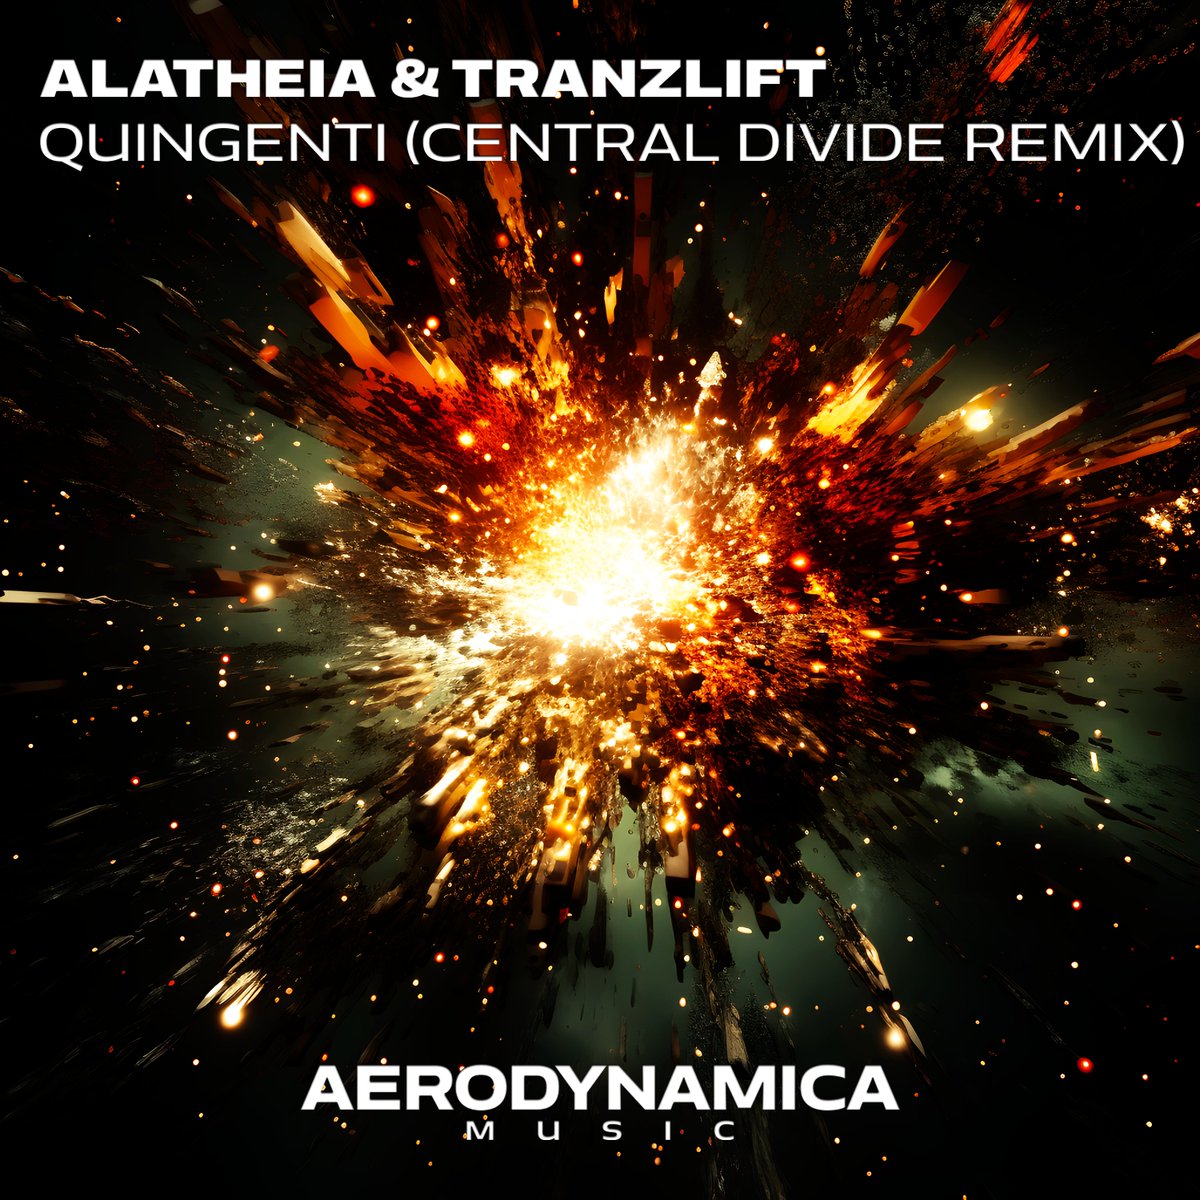 Do you remember 'Quingenti' in collaboration with tranzLift we did a few years ago? A great remix by @wfCD_ is out next Friday on @AerodynamicaM
#trancefamily #trancemusic #trance #upliftingtrance
Pre-save now: hypeddit.com/alatheiatranzl…